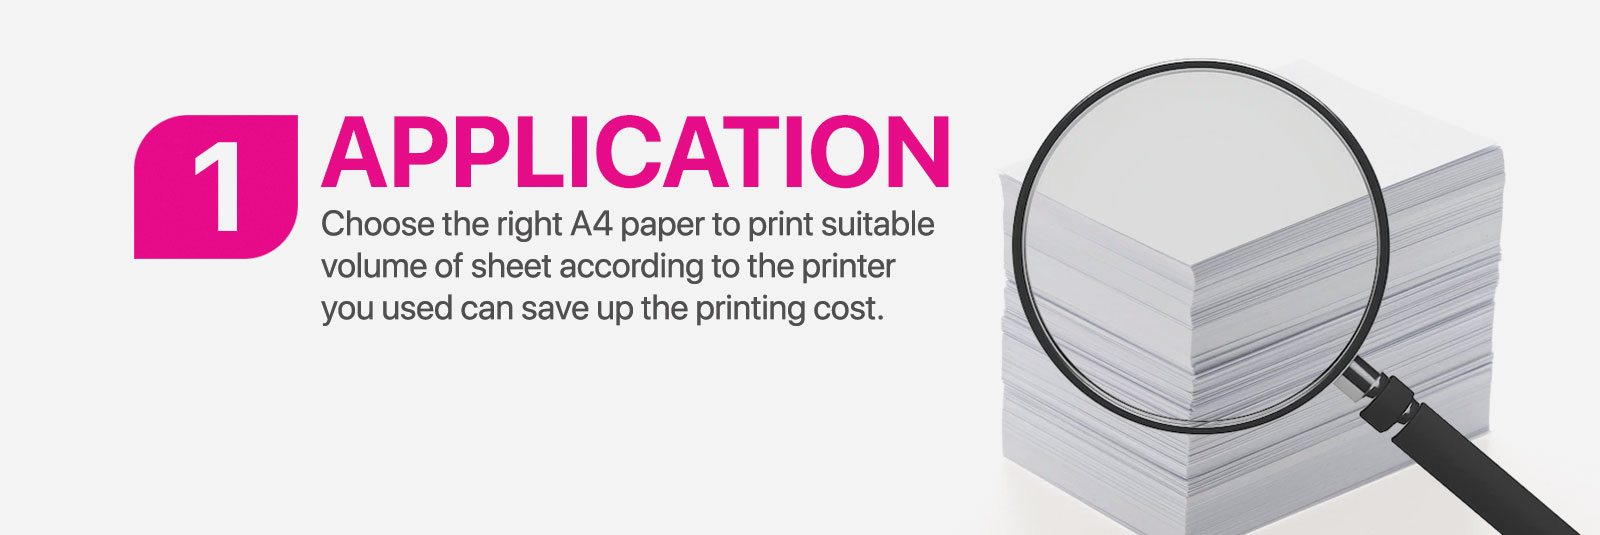 Application - Choose the right A4 paper to print suitable volume of sheet according to the printer you used can save up the printing cost